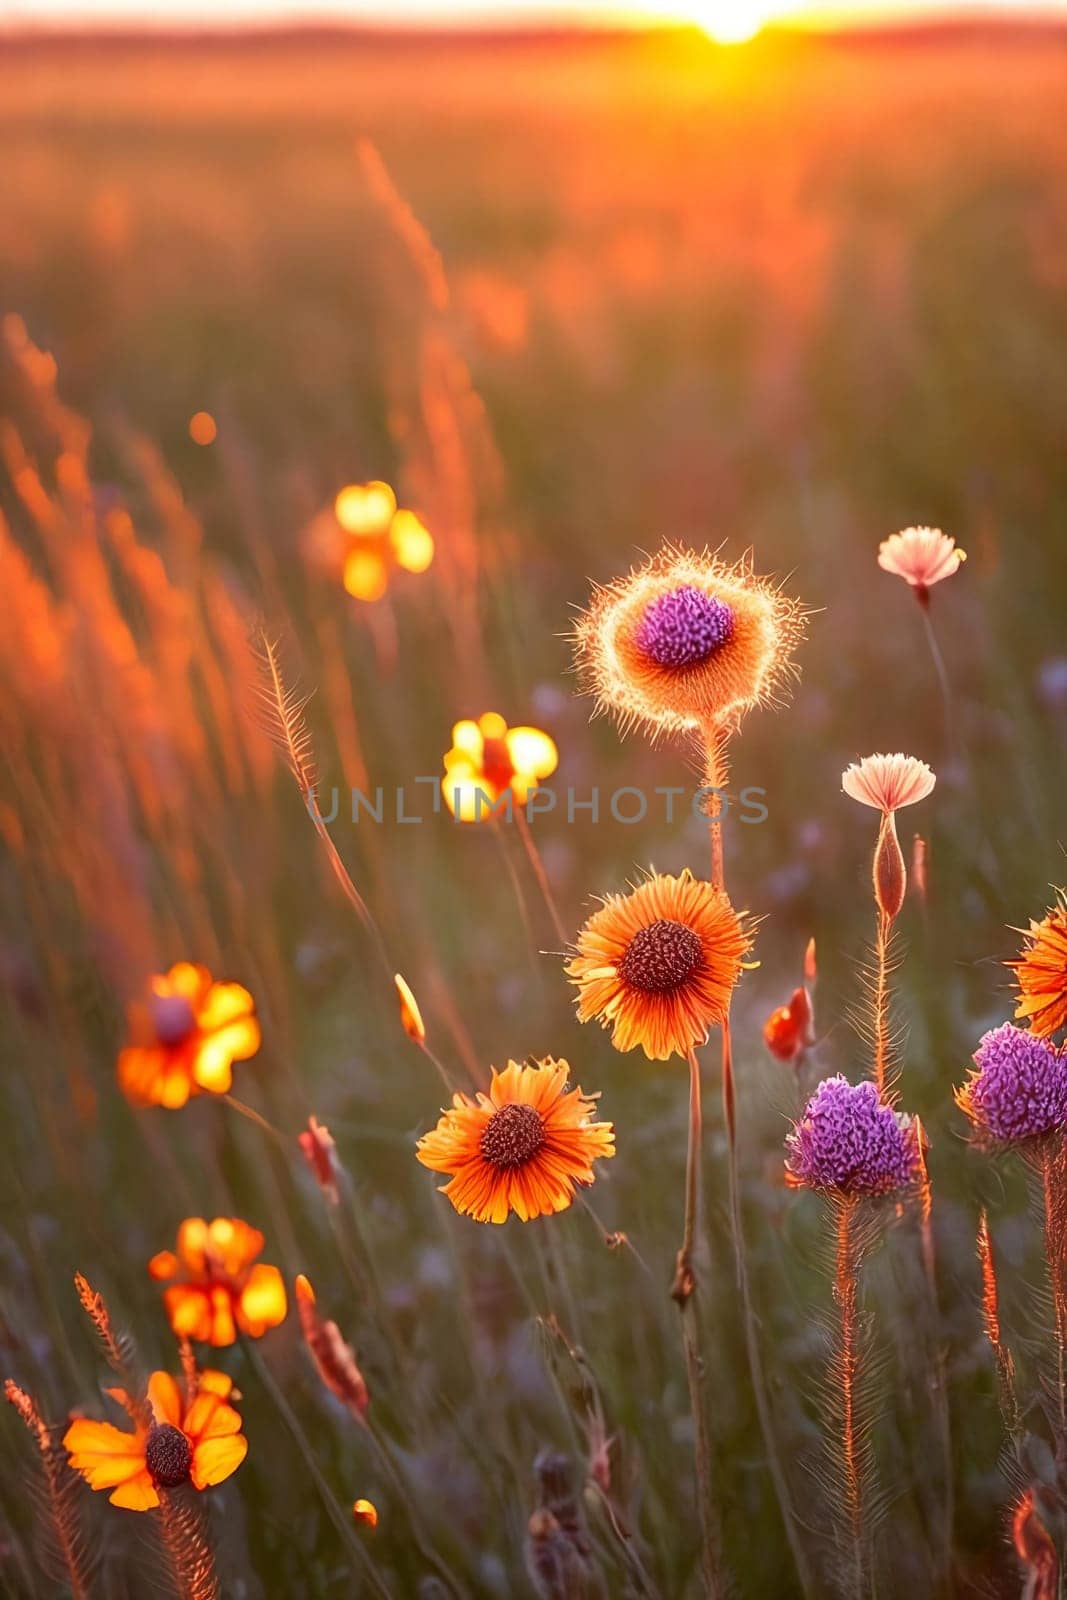 Golden Hour Glow. Warm, soft light of the setting sun illuminating delicate wildflowers or intricate spiderwebs in a field, highlighting their natural beauty.